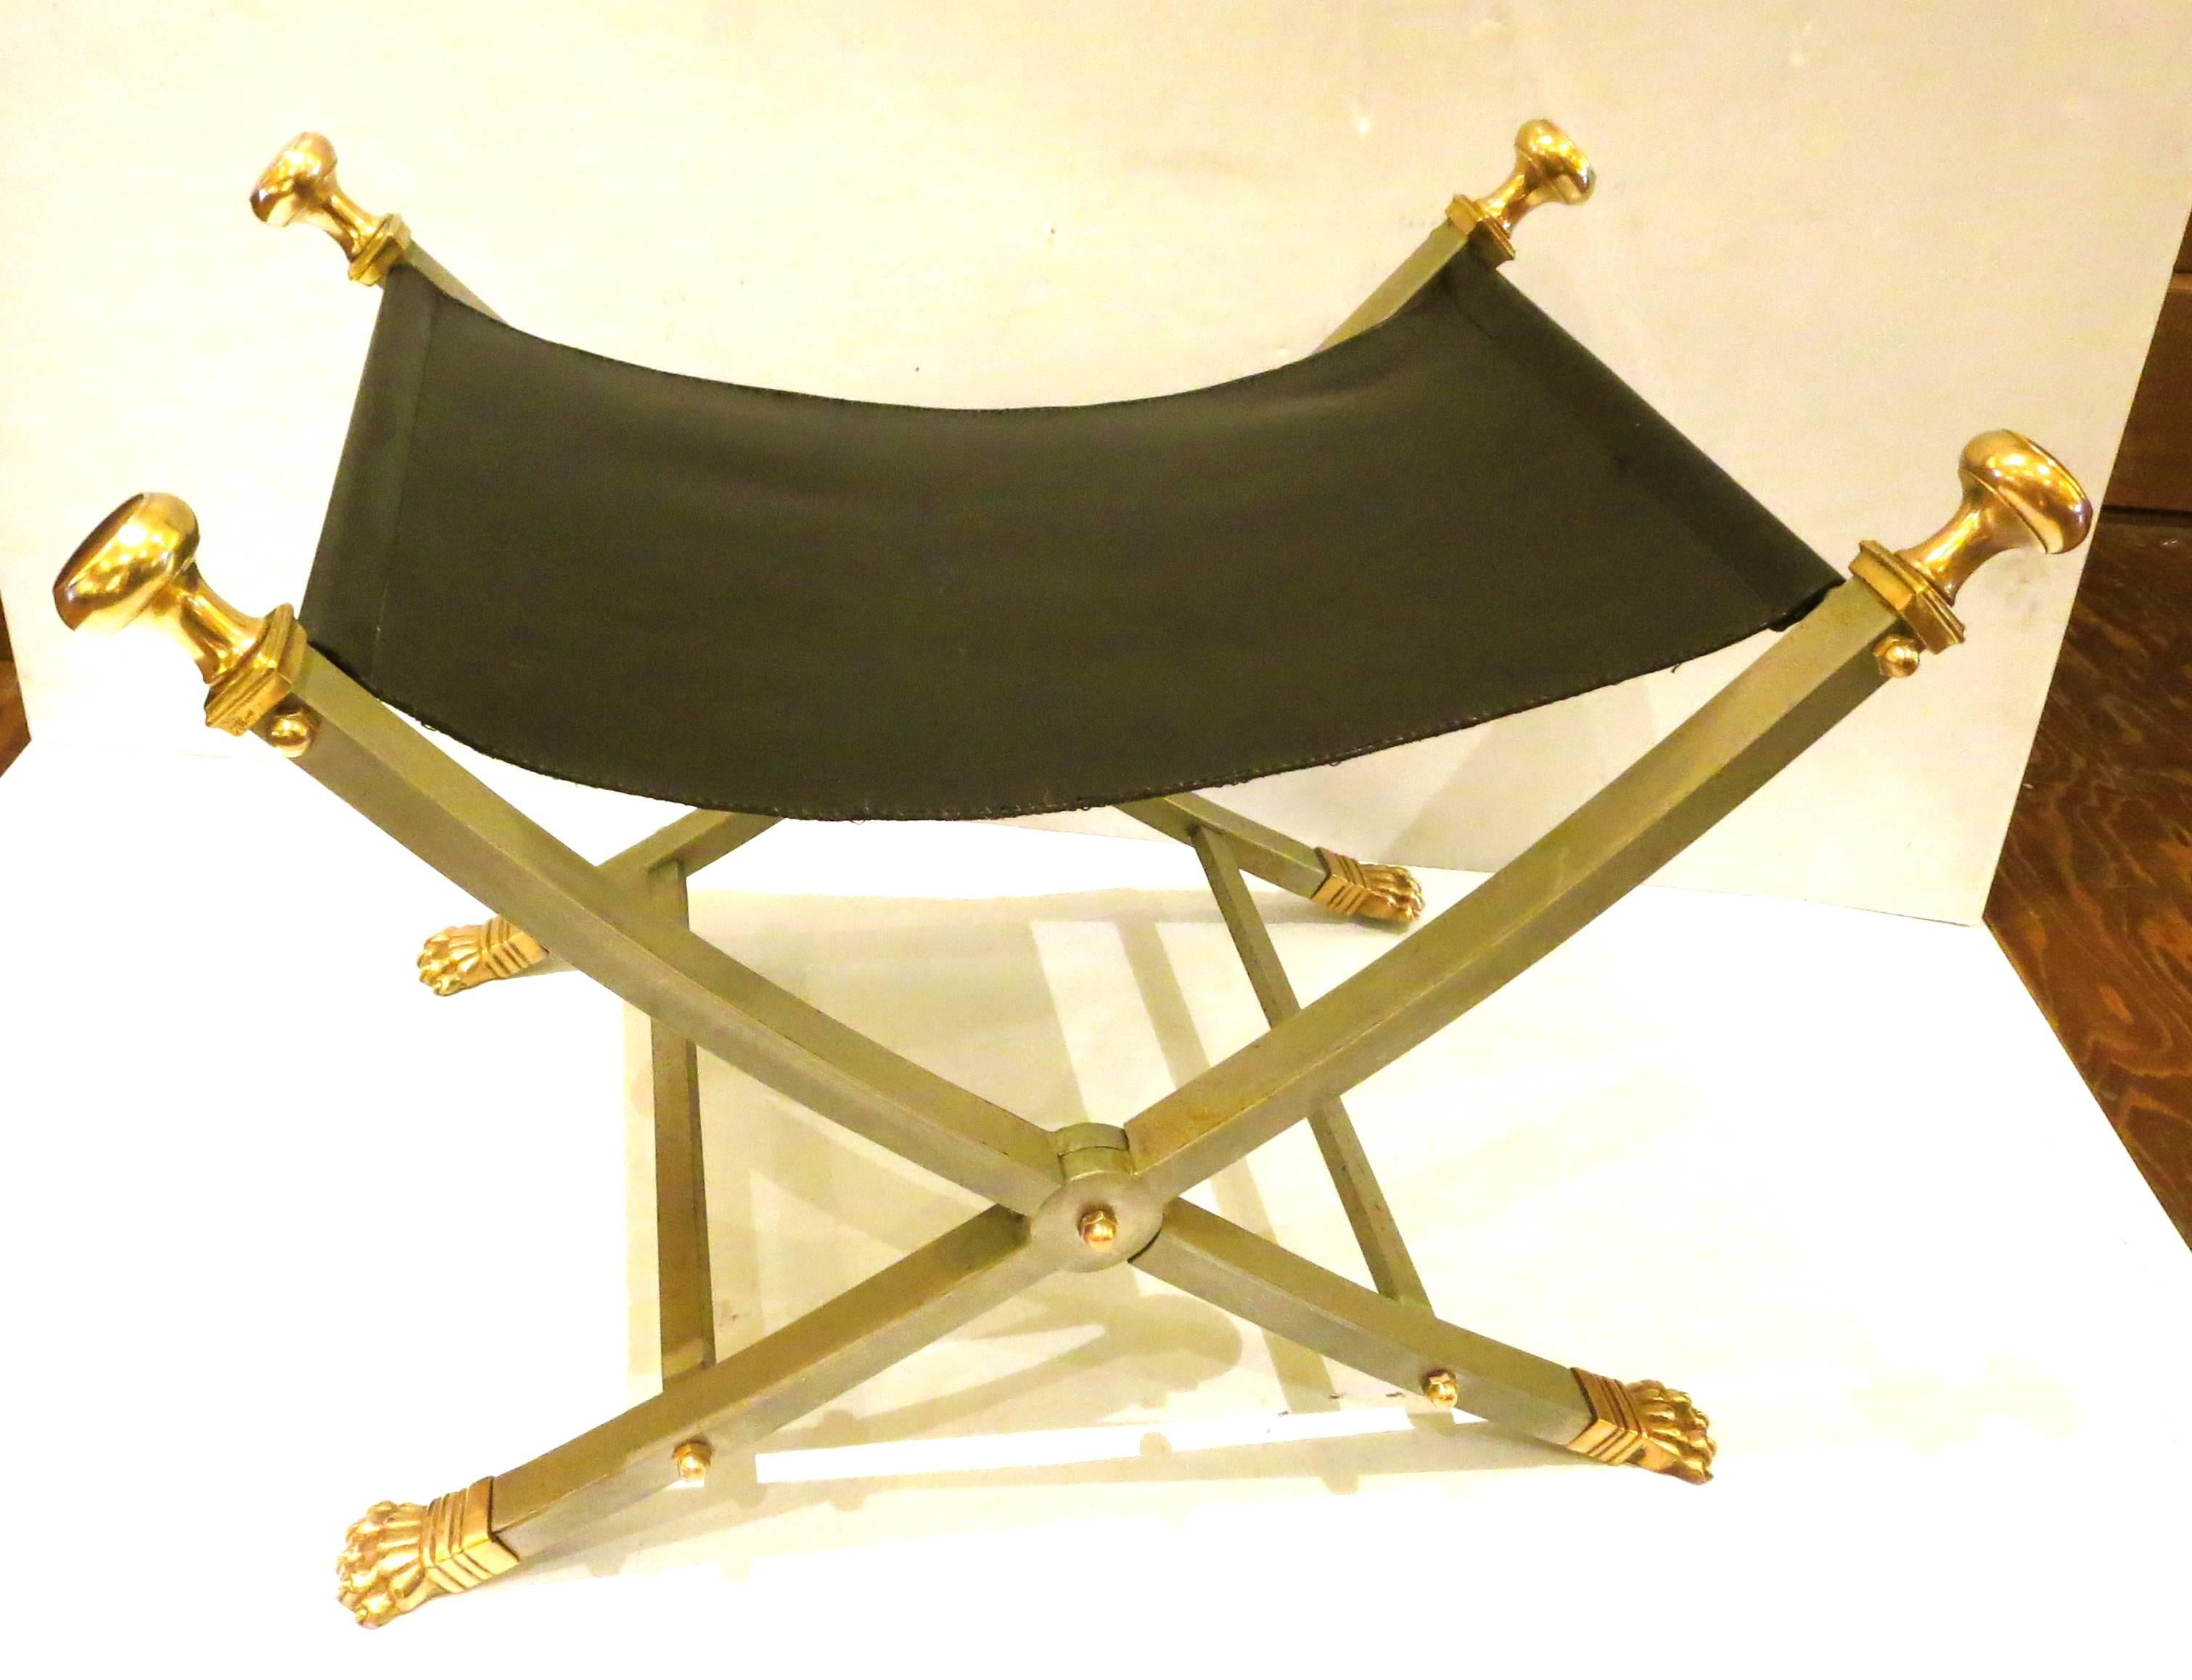 Elegant striking folding stool by Maison Jansen Brushed nickel over steel frame with brass paw feet and finials. Stamped Italy on underside of feet. Appears in the books: Jansen: Decoration, editor Jean Leveque, ppg 132-133. Les Decorateurs des